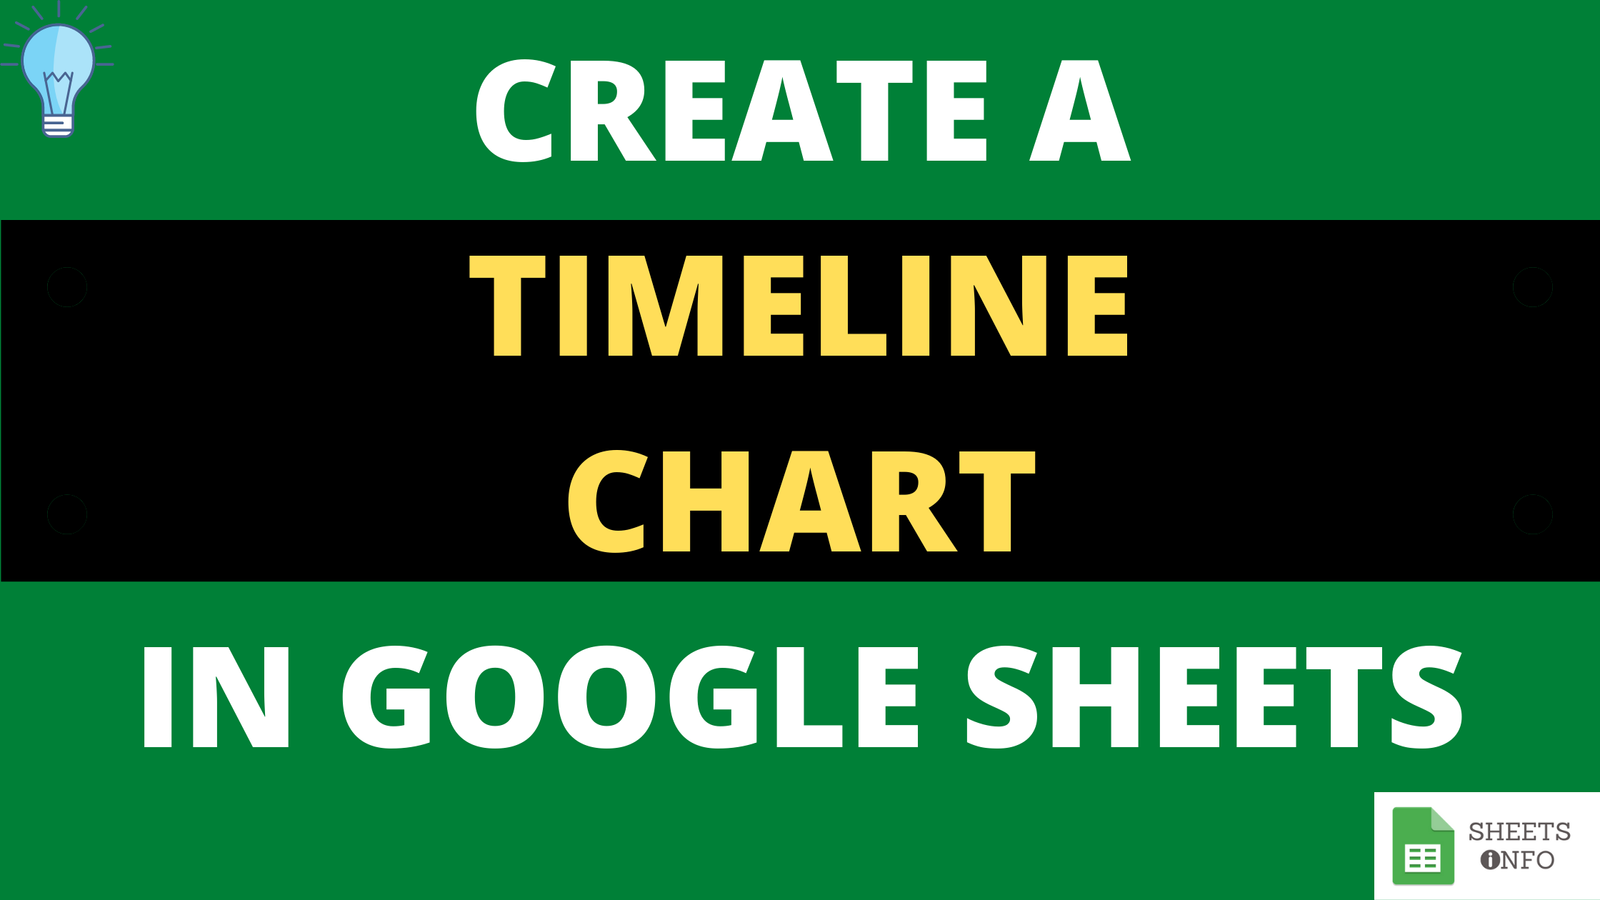 Create Timeline Template in Google Sheets